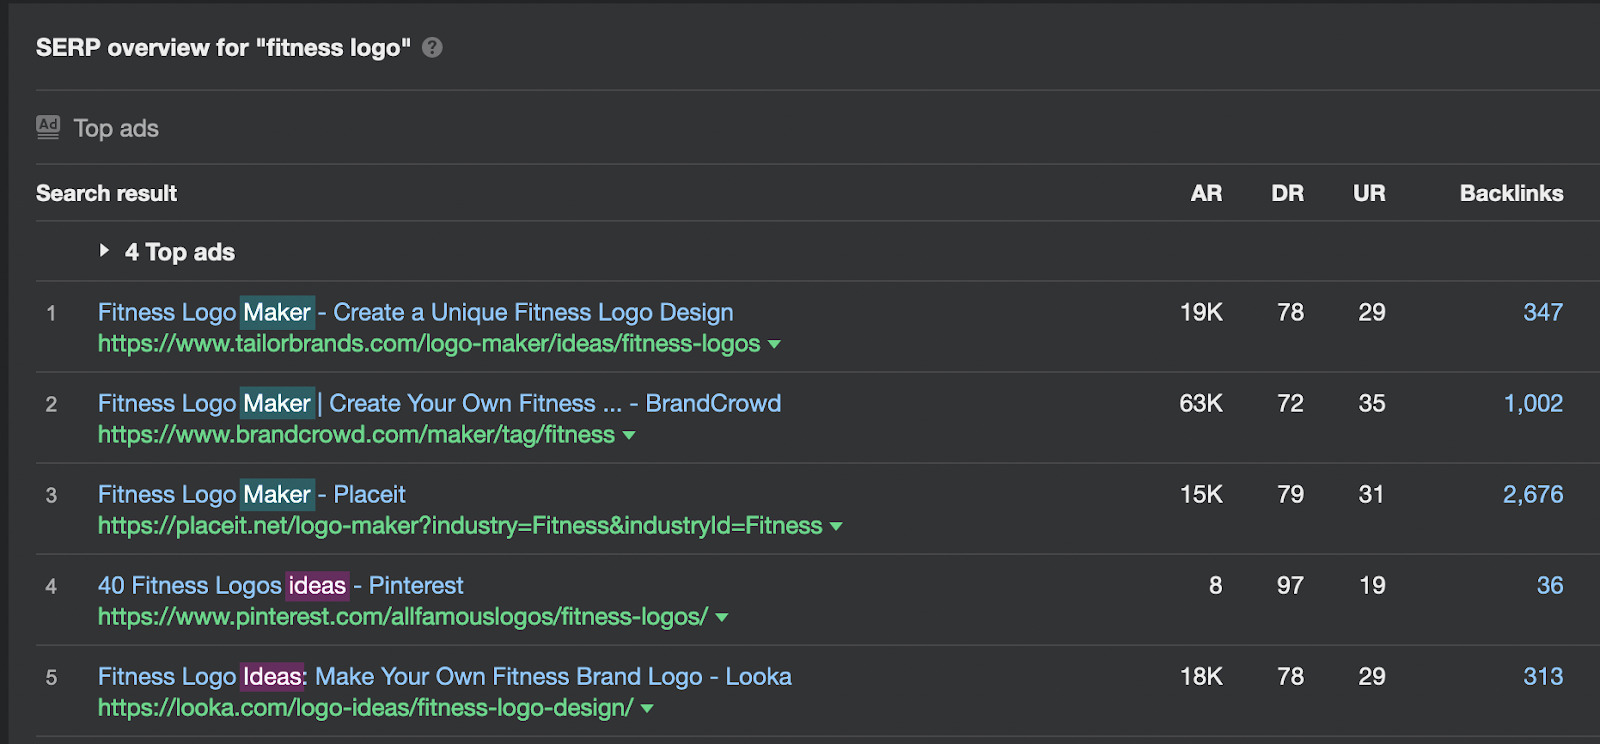 SERP overview for "fitness logo" 